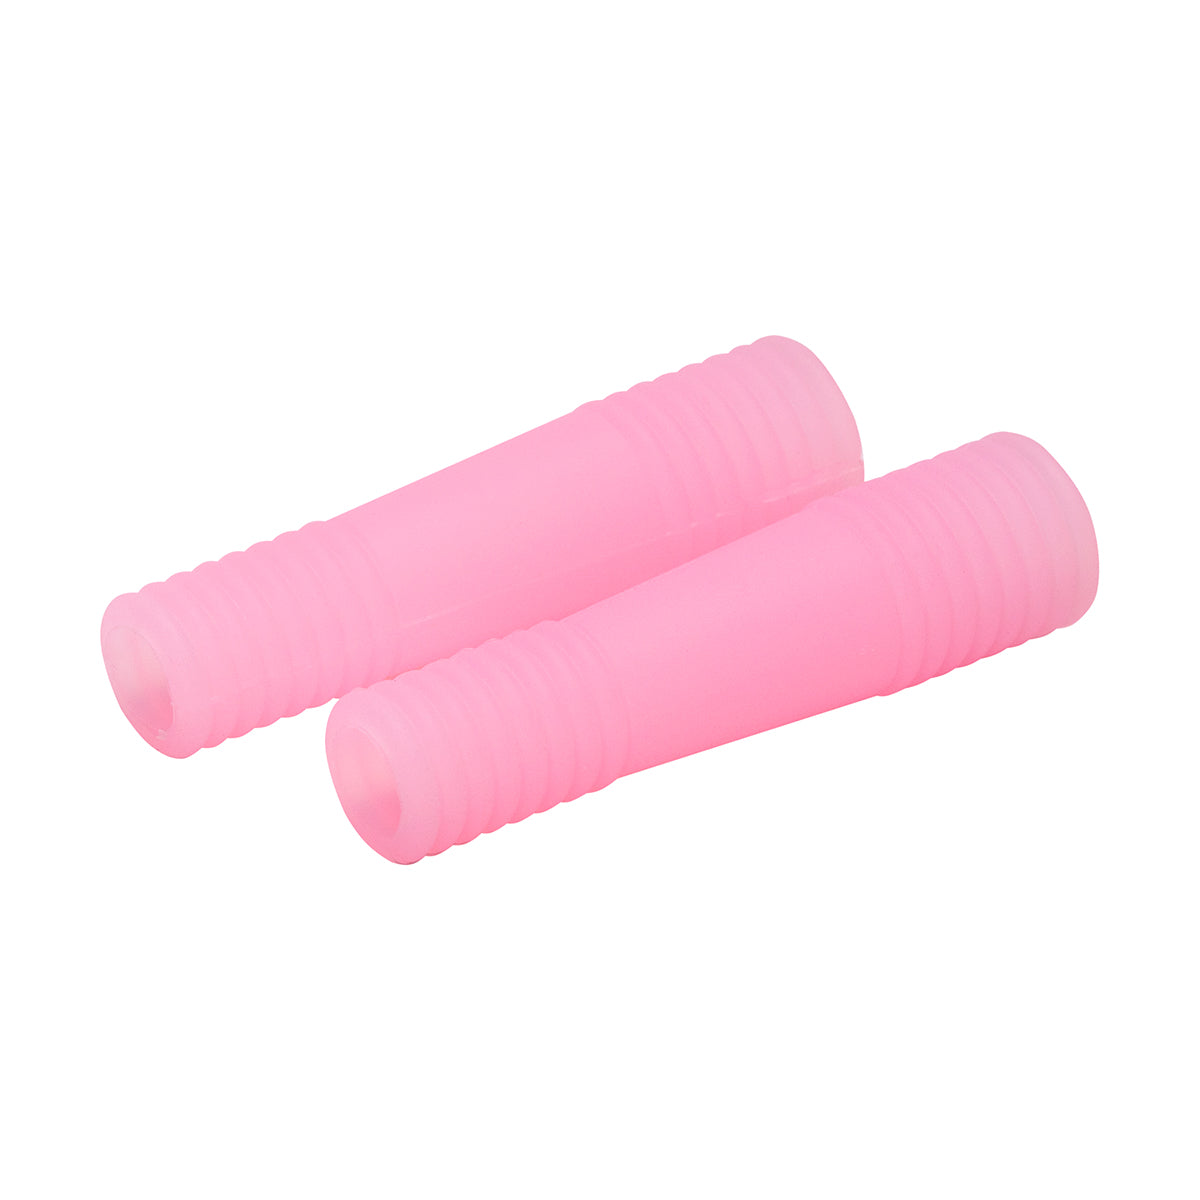 Cuticle Nippers Silicone Cover Pink